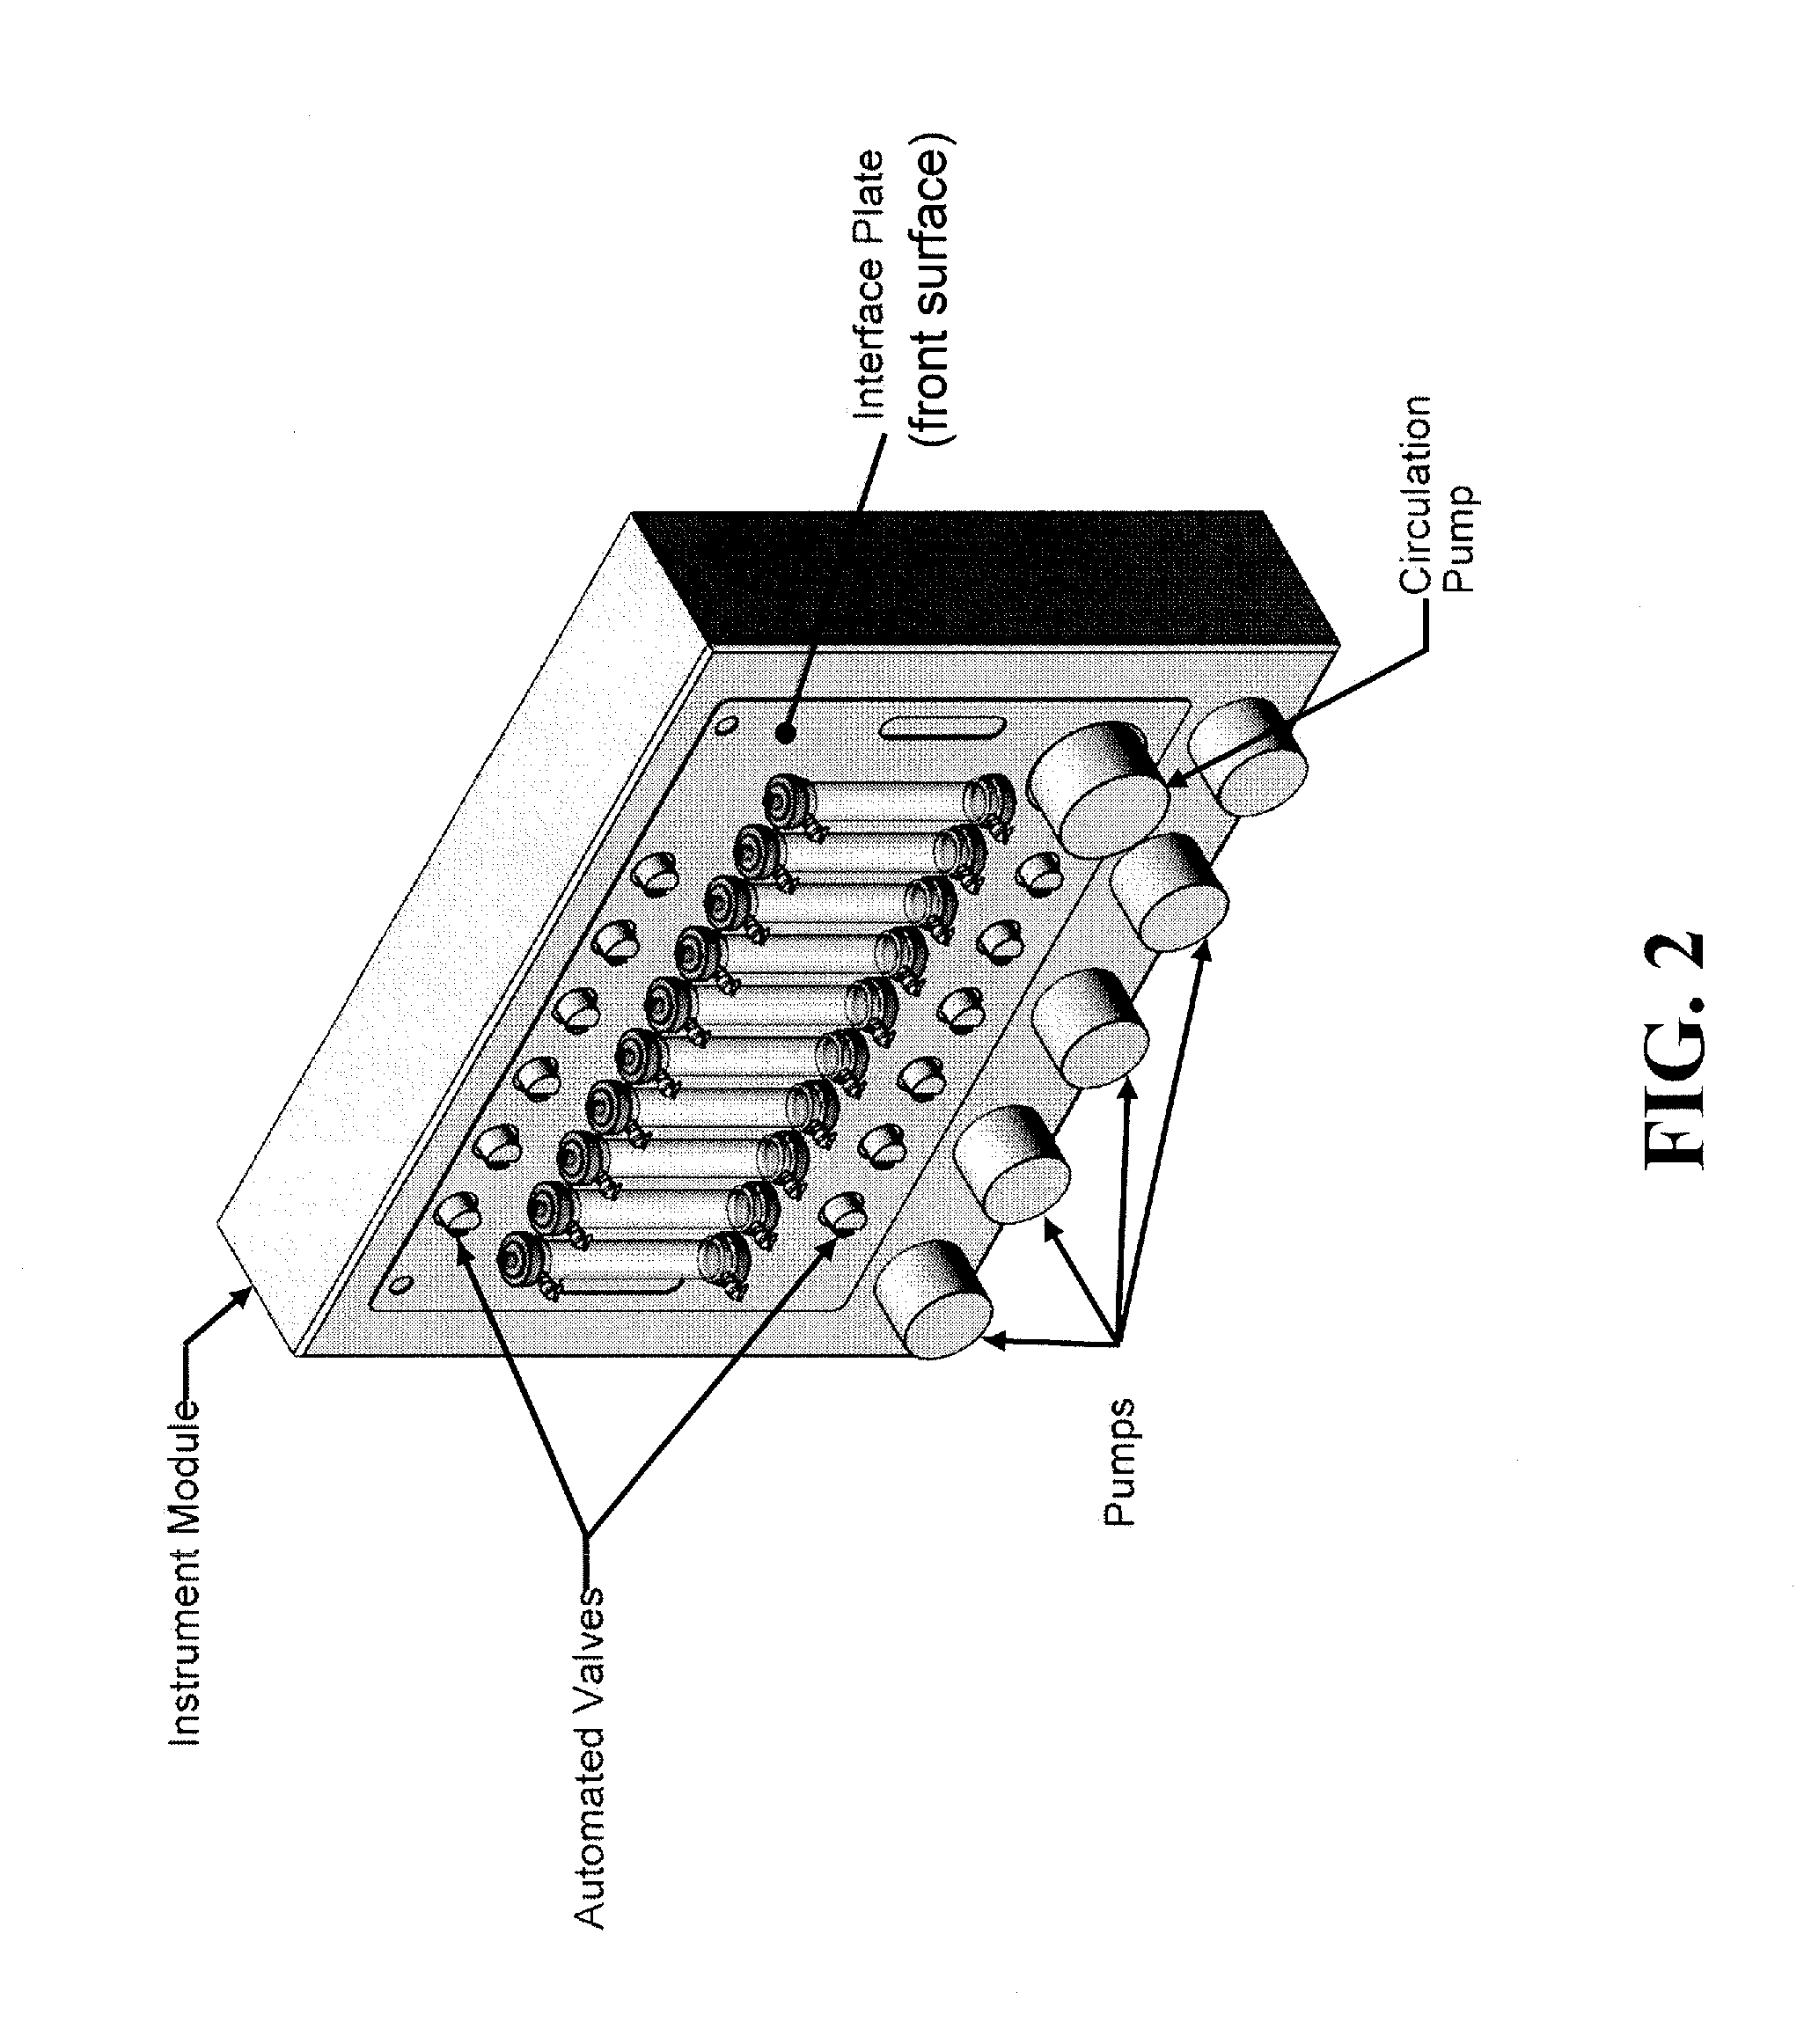 Biomanufacturing suite and methods for large-scale production of cells, viruses, and biomolecules